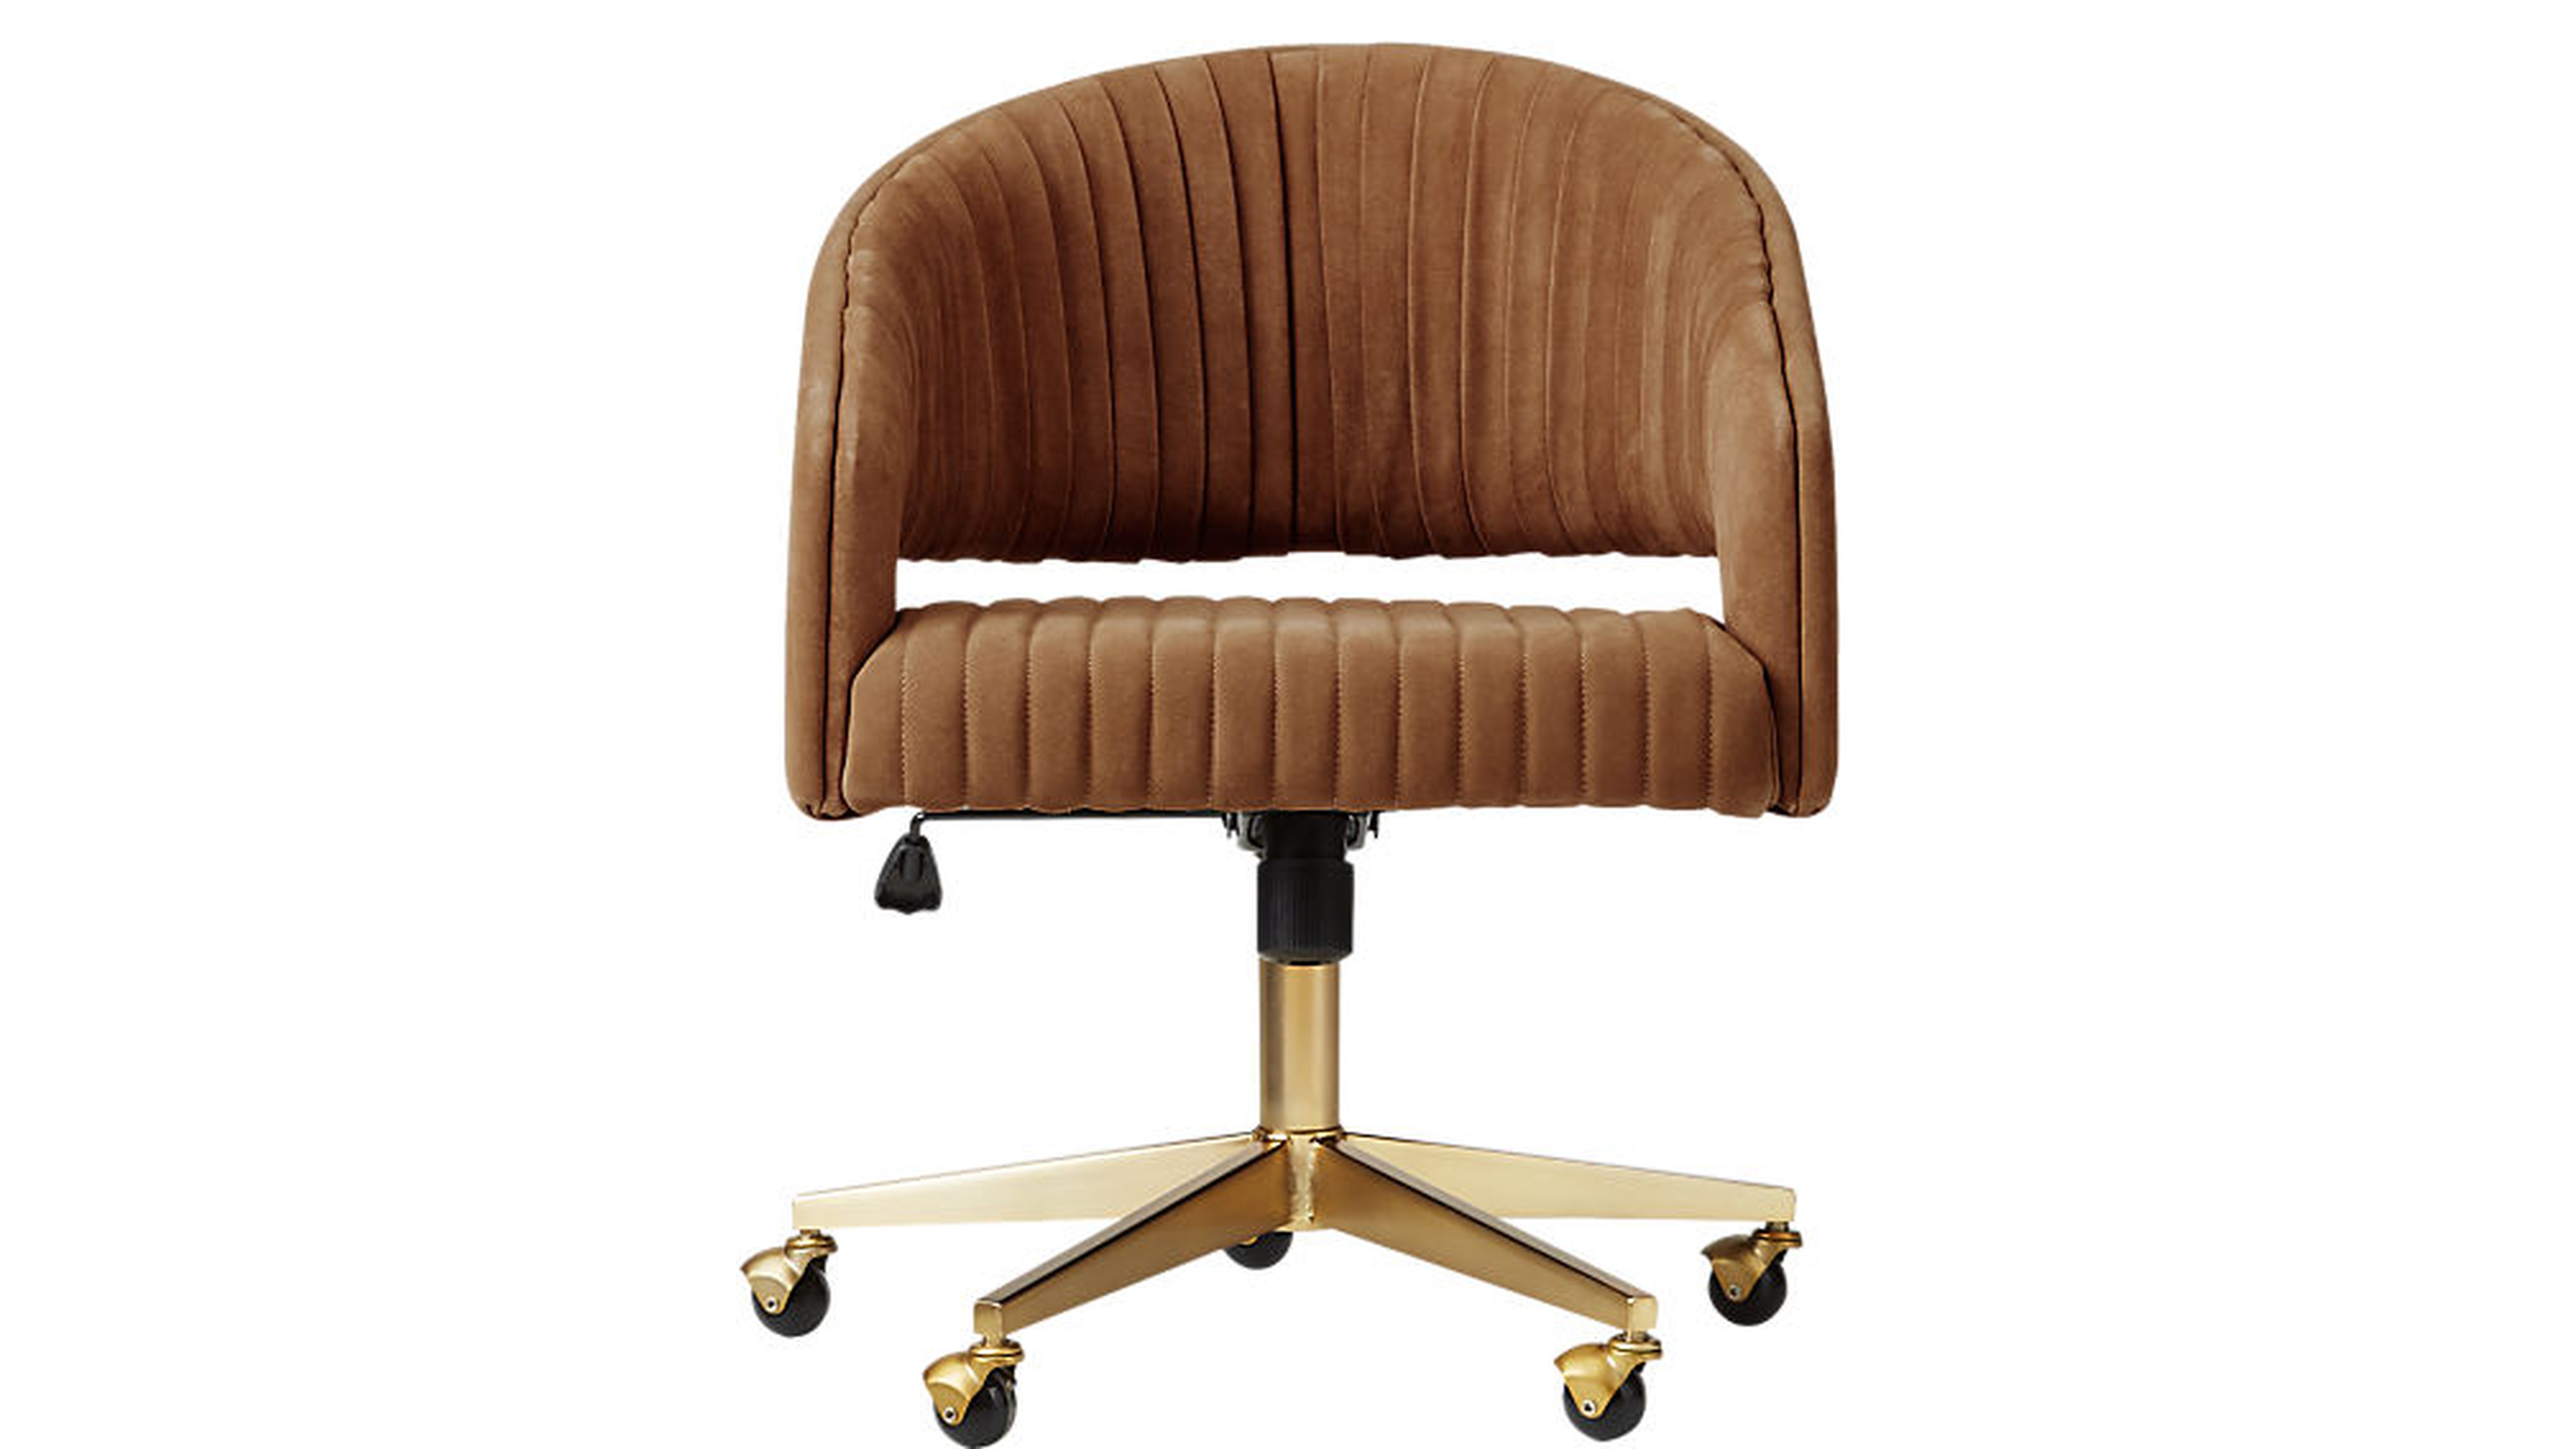 Channel Suede Office Chair - CB2